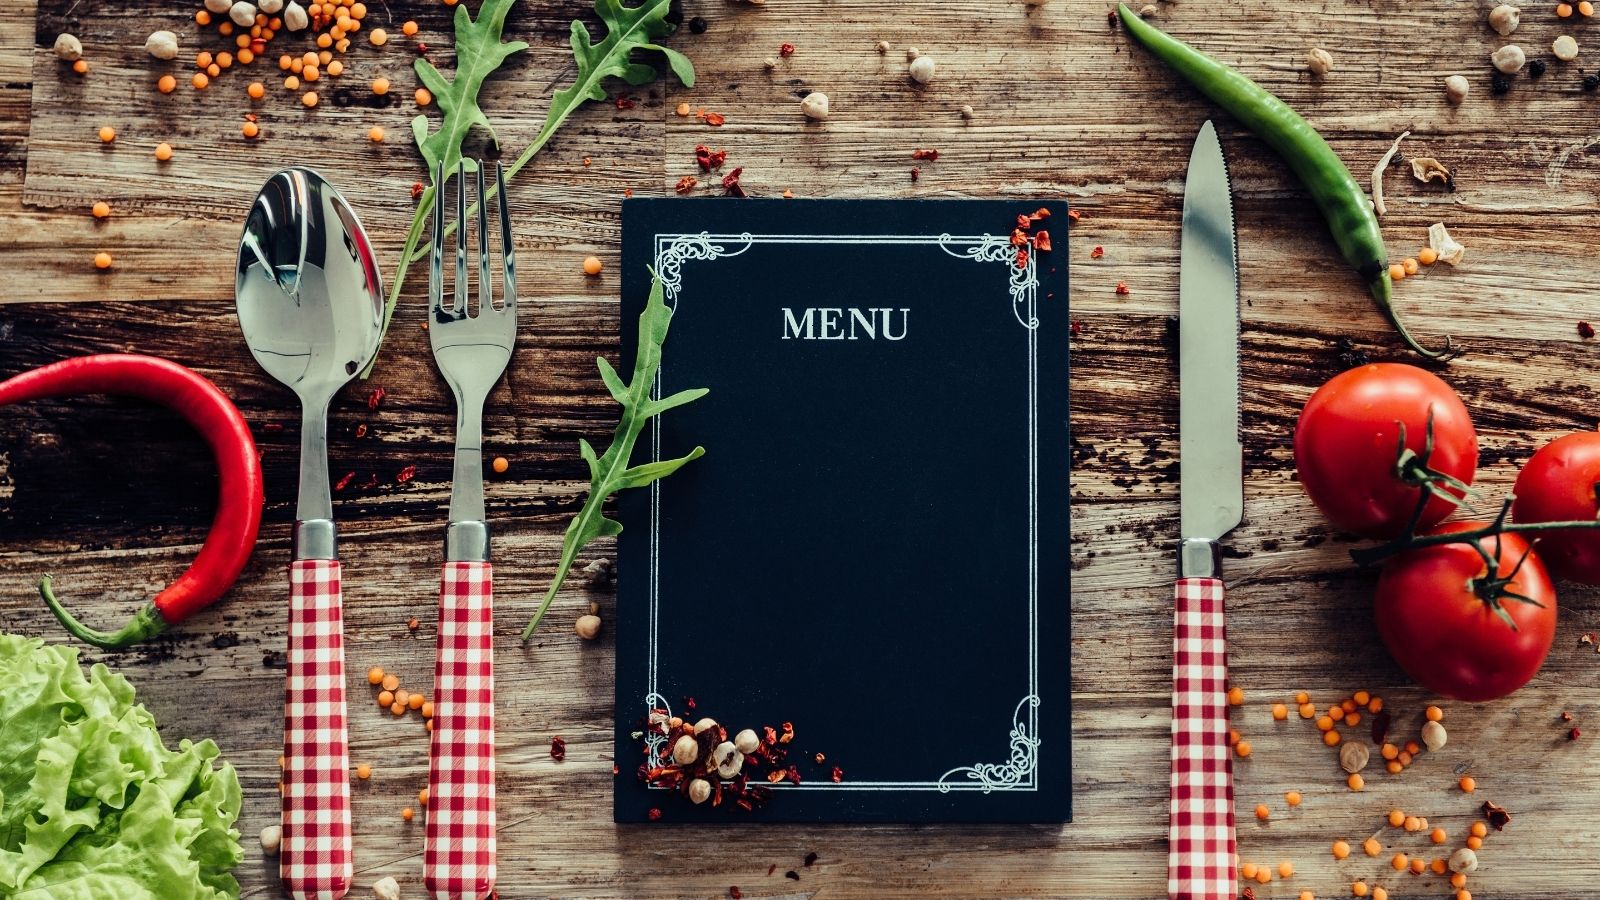 8 Restaurant Menu Design Tips That Will Help You Stand Out